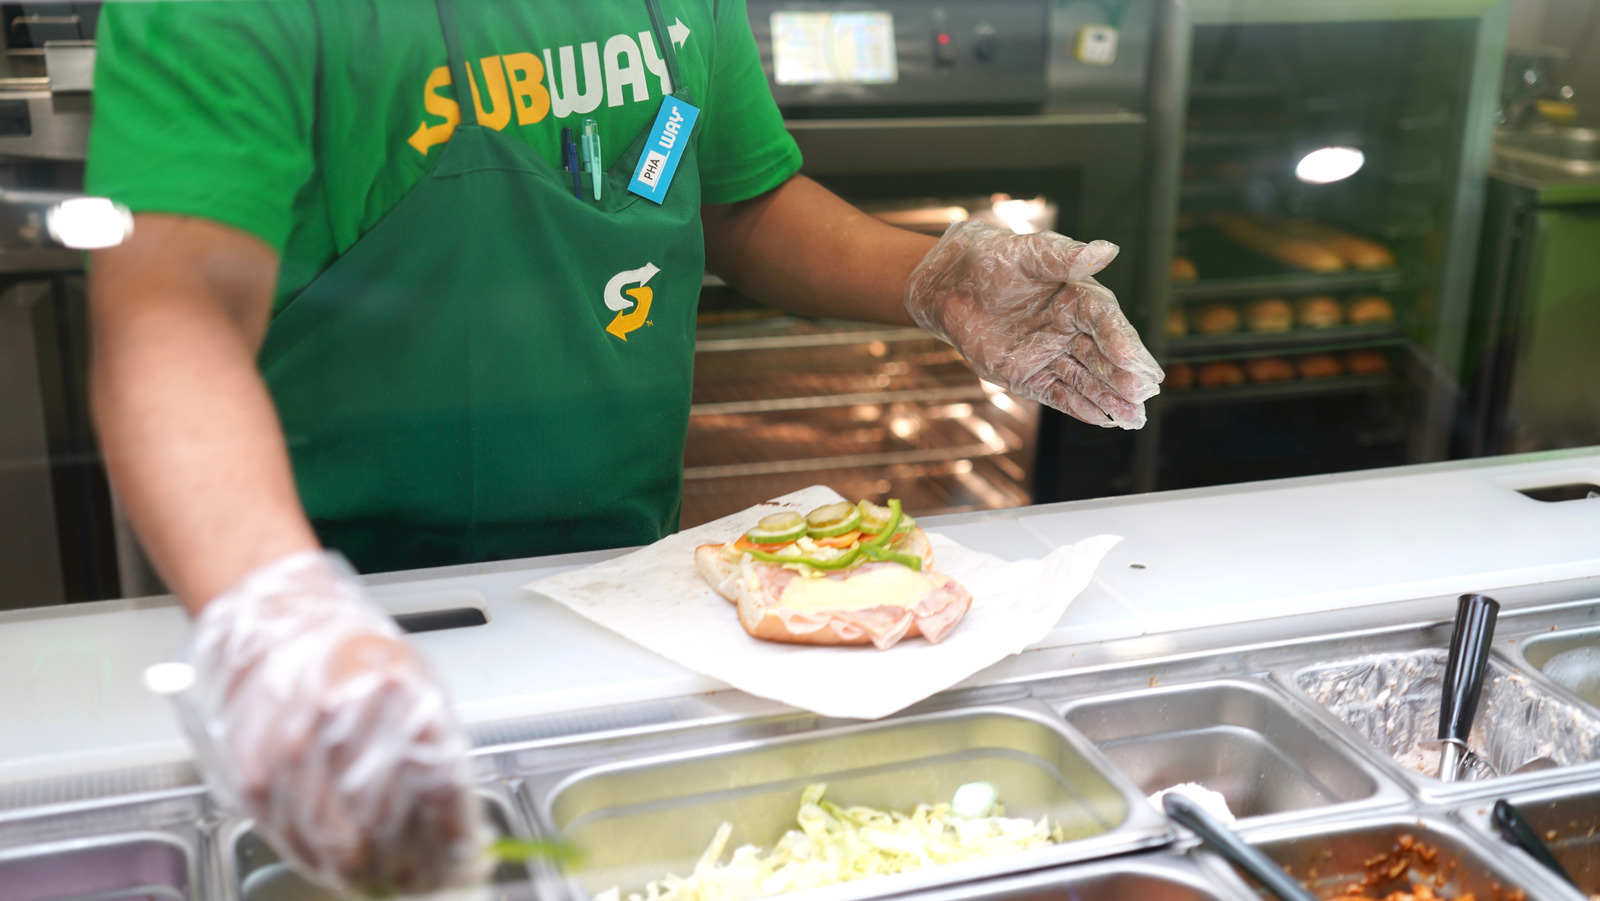 The Real Reason Subway Employees Make Food In Front Of Customers